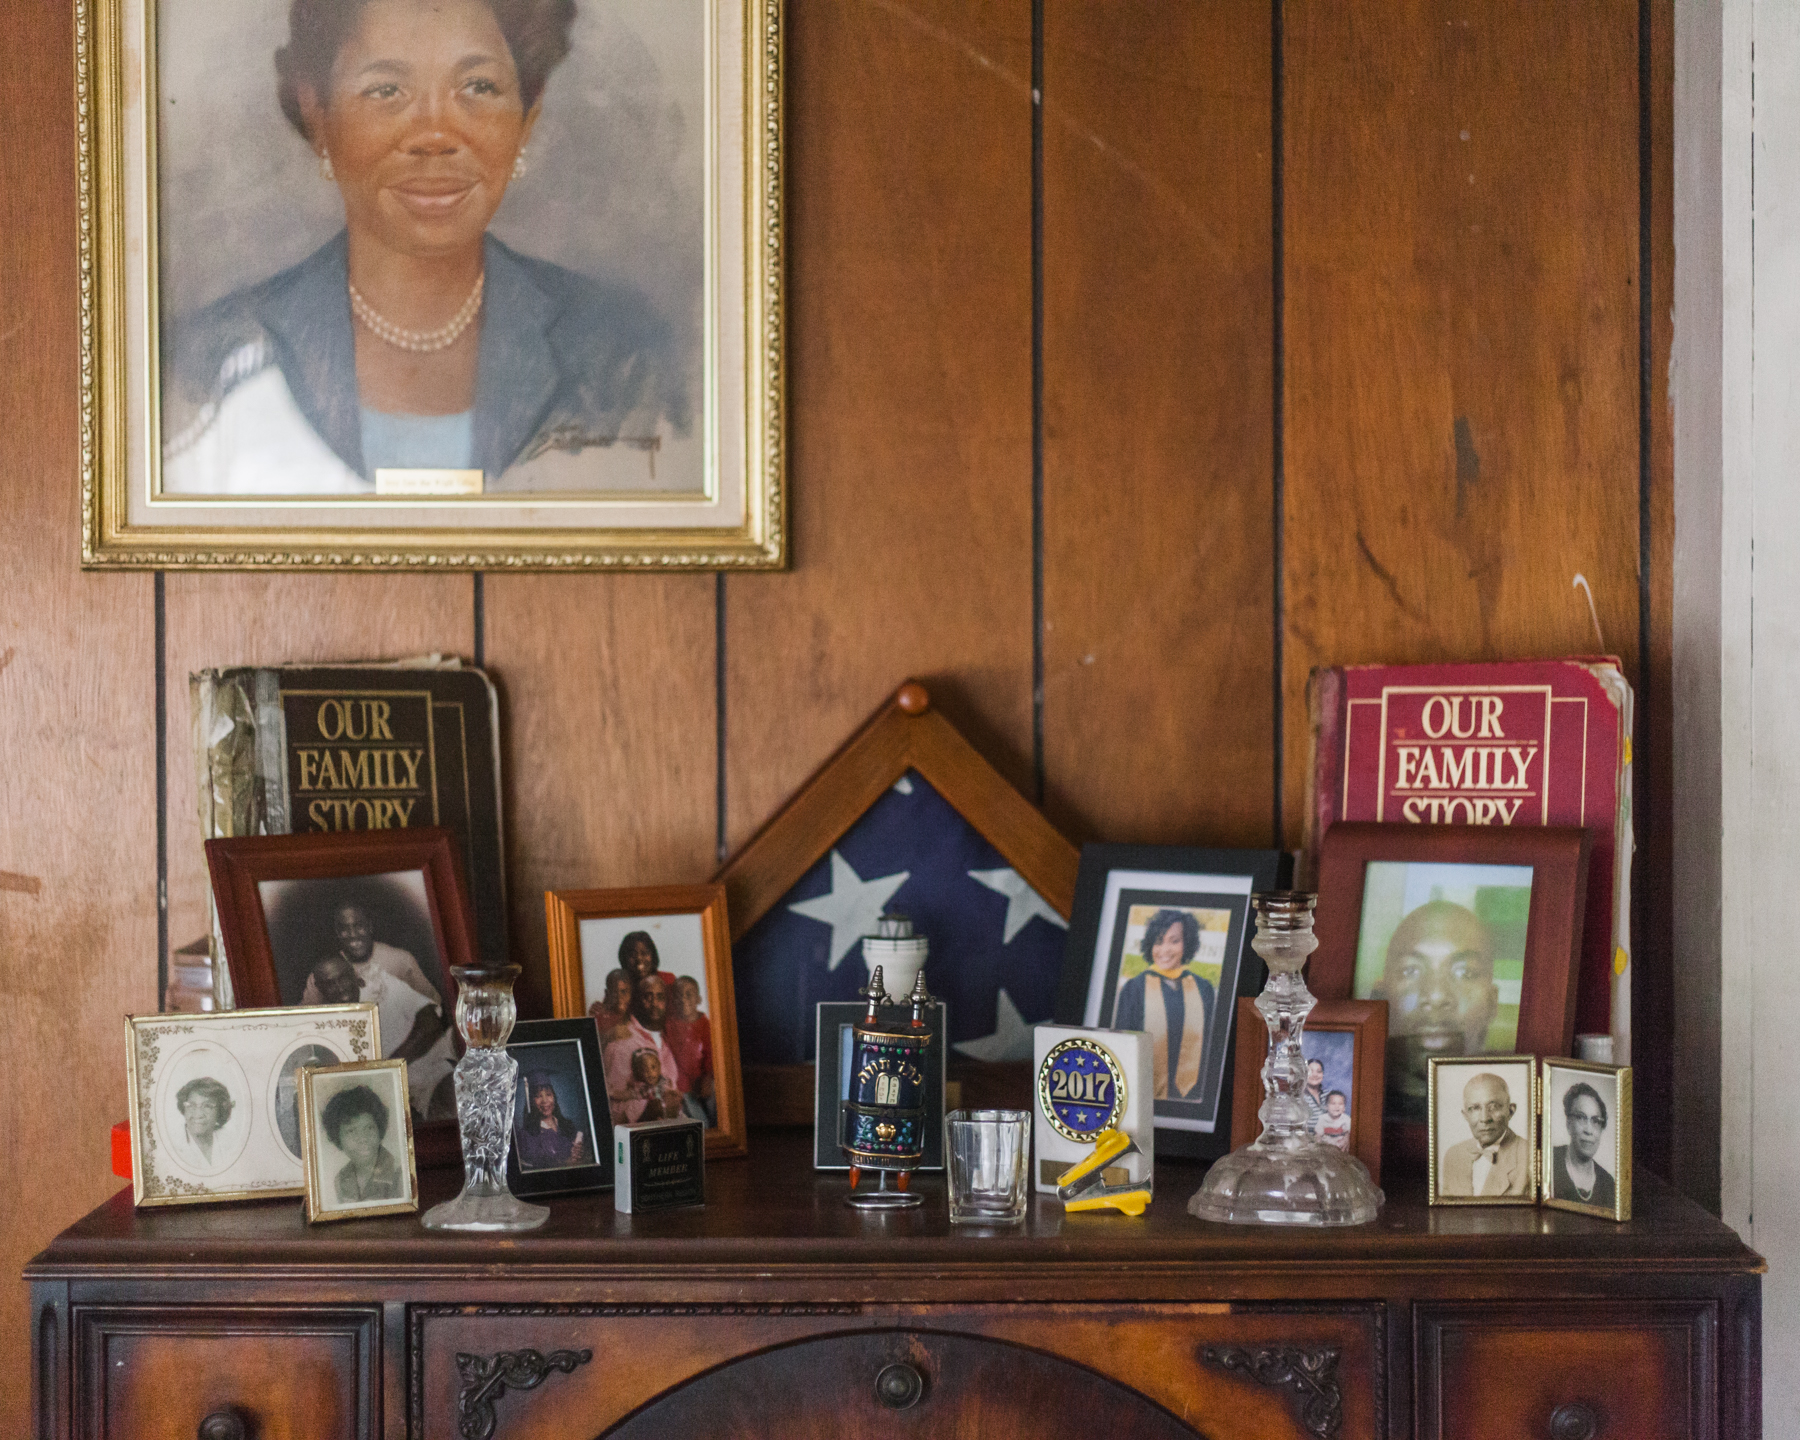  Dr. Collins is a history buff and keeps records, newspaper clippings, certificates, and other documents that he displays around his home. There are also many portraits of family members; pictured here is his aunt who raised him. 